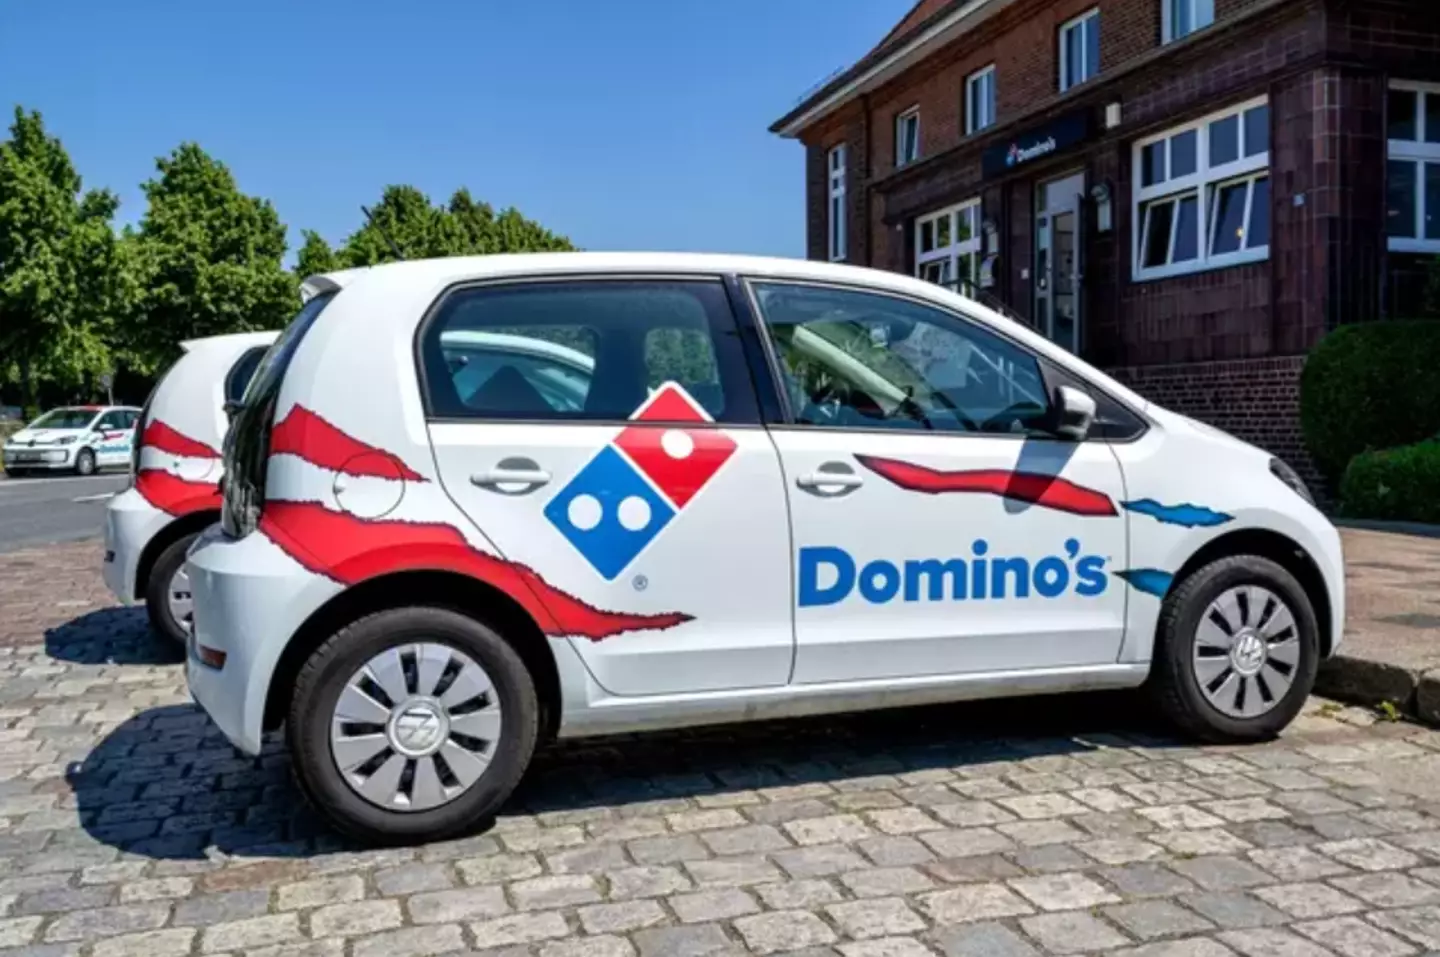 People were shocked at how little Domino's delivery drivers are tipped.